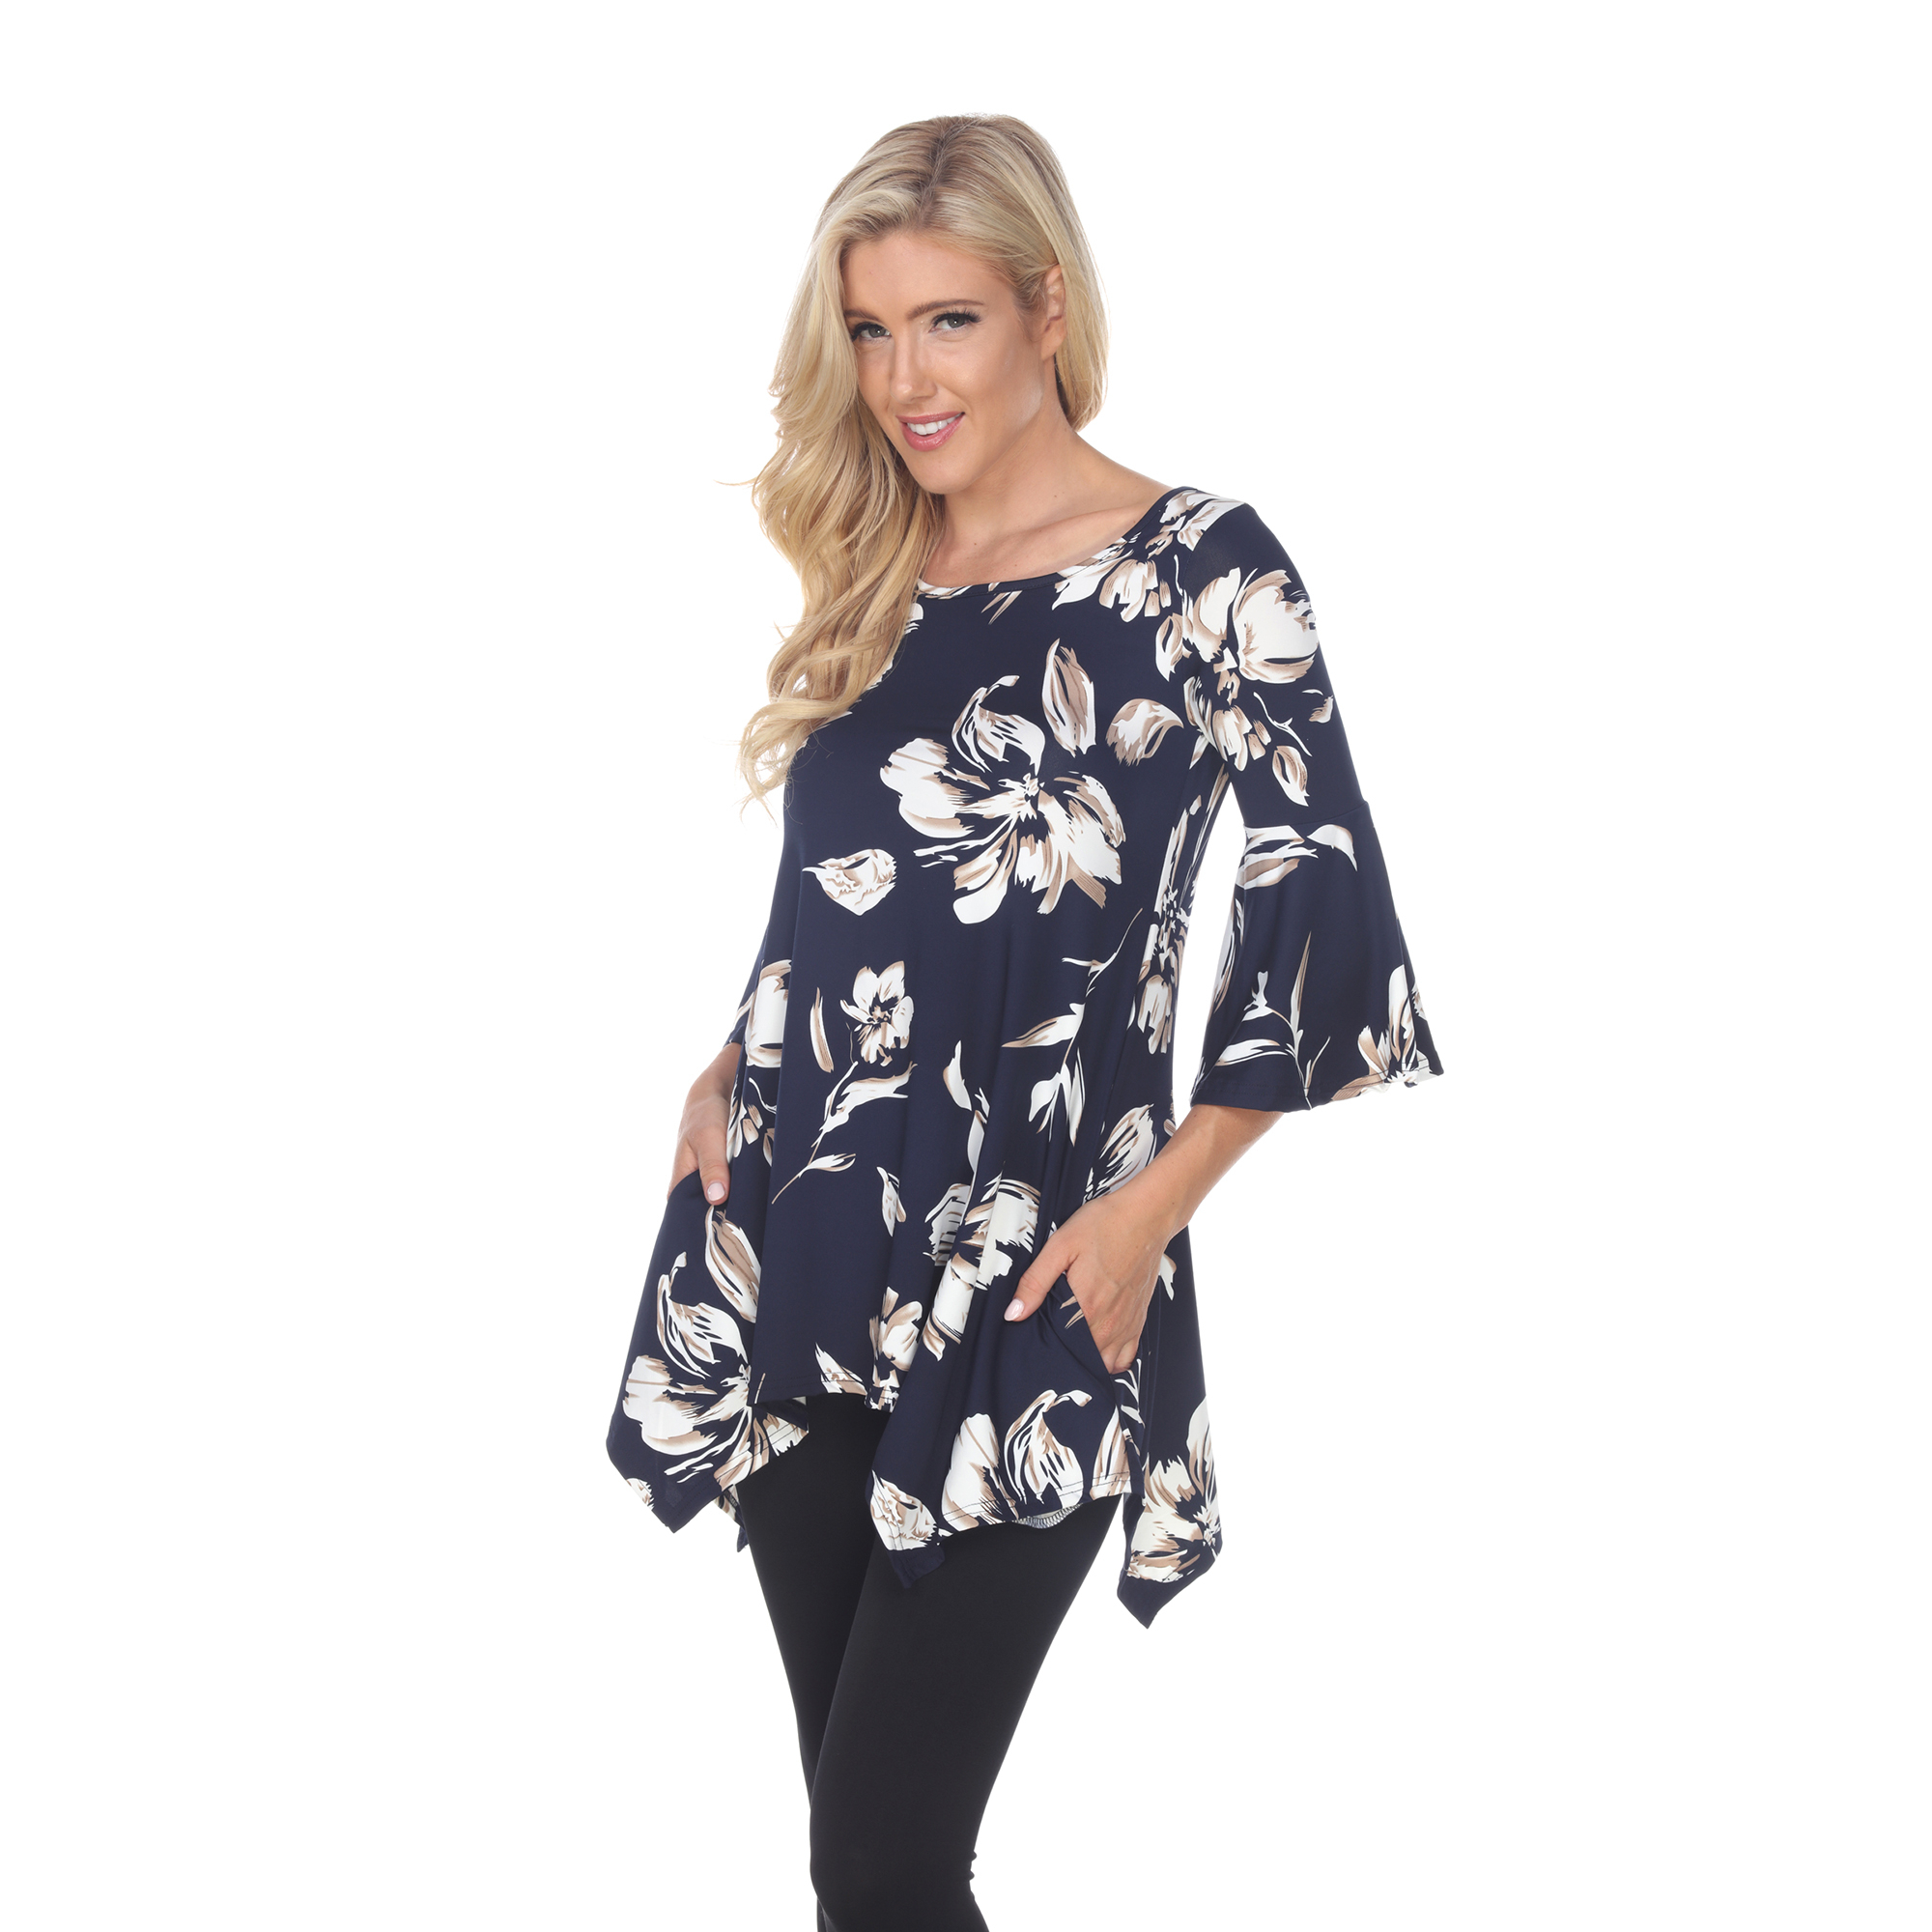 White Mark Women's Floral Print Quarter Sleeve Tunic Top With Pockets - Black, 1X